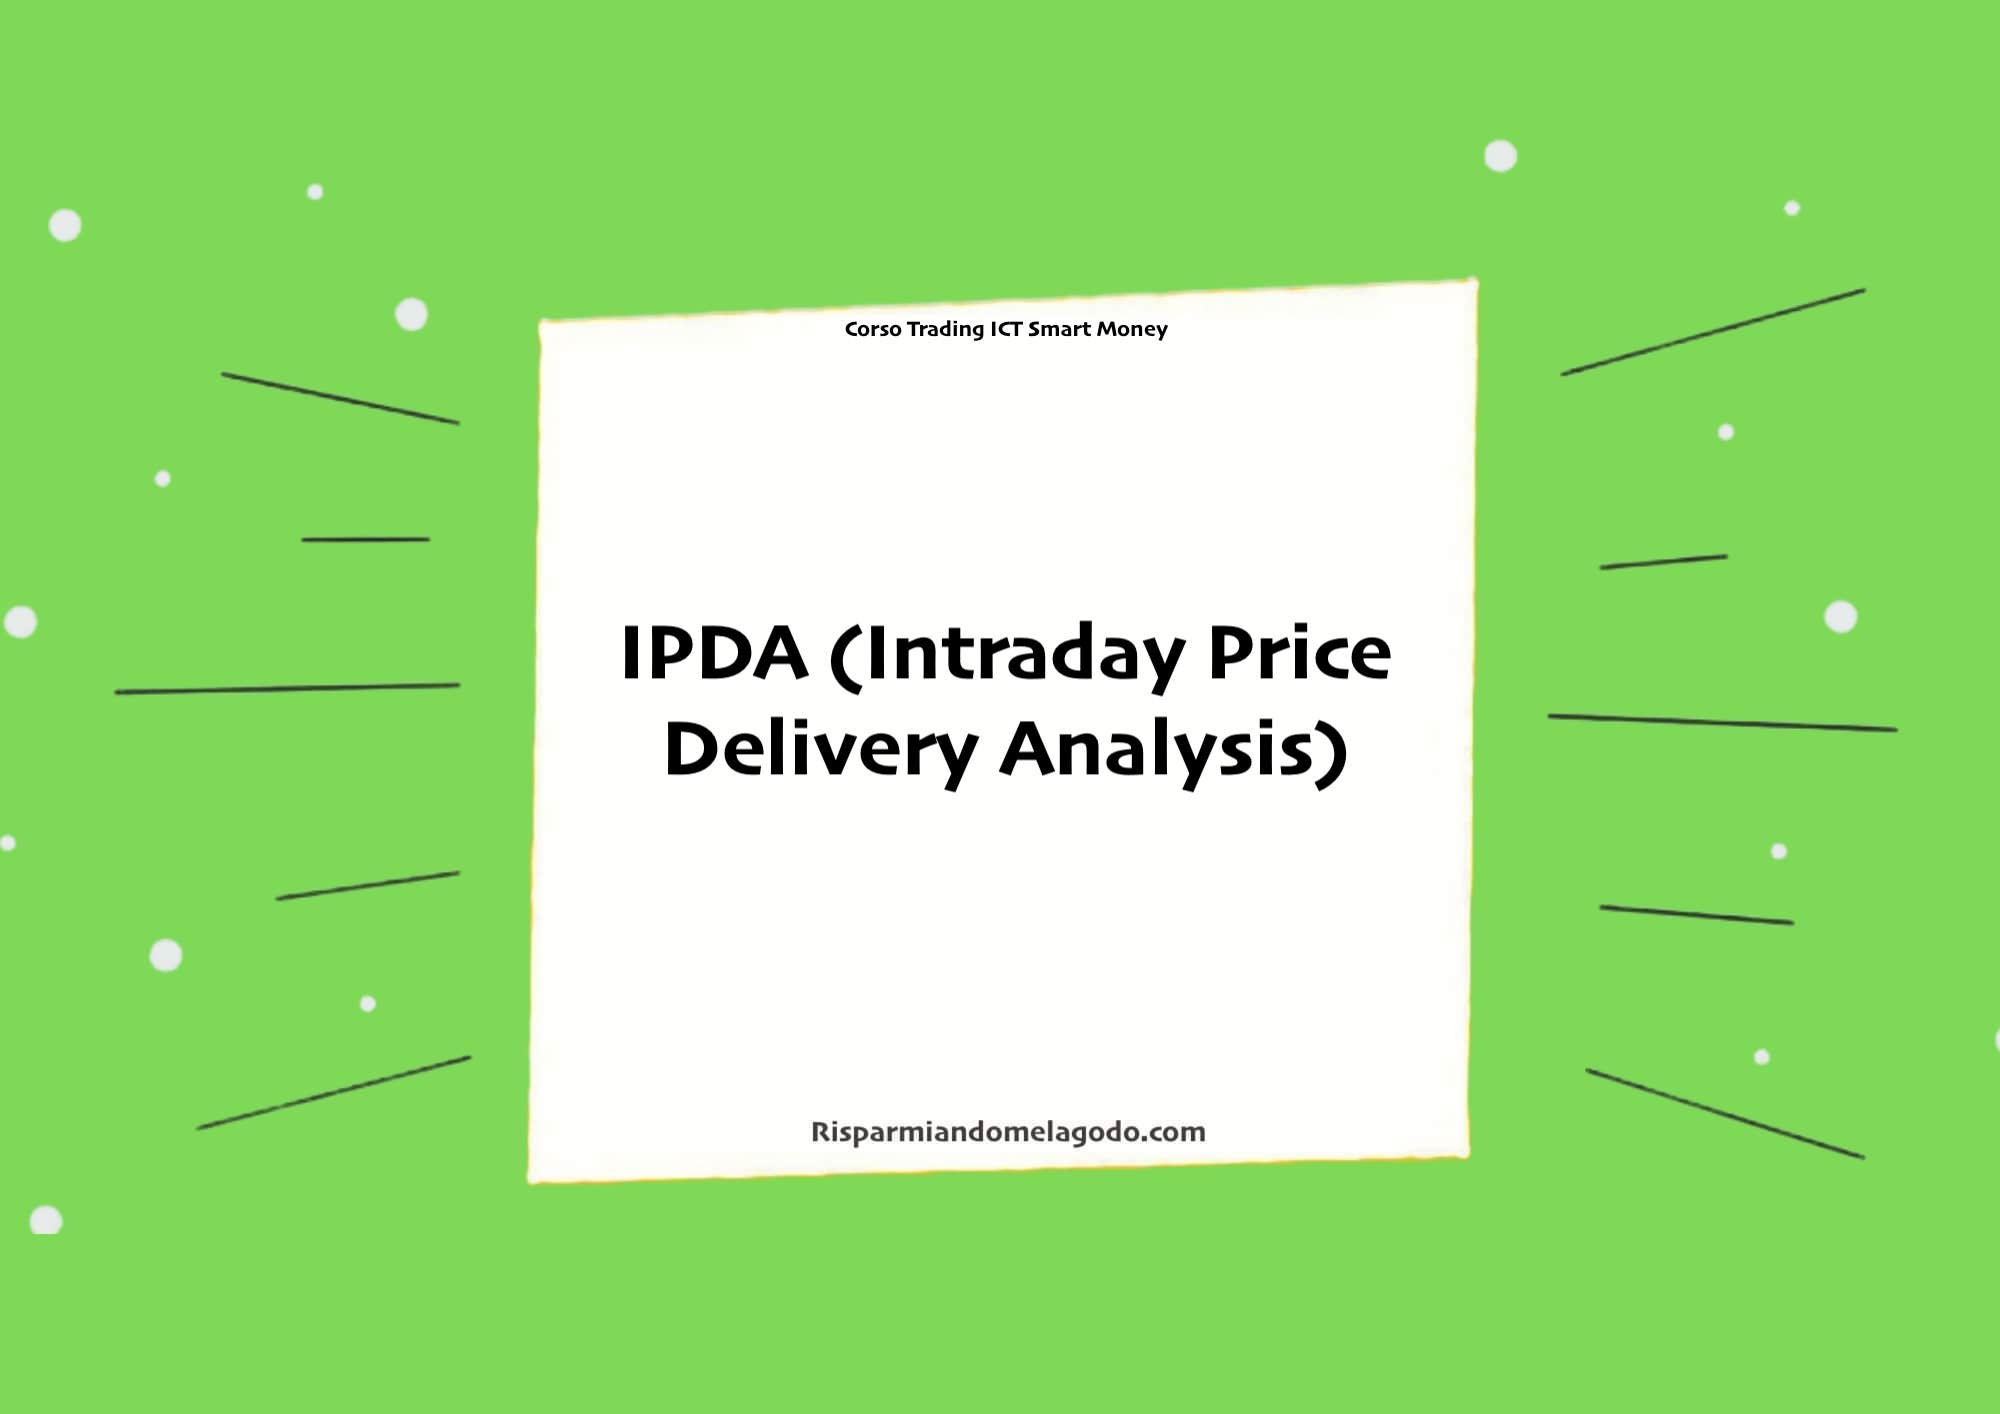 IPDA (Intraday Price Delivery Analysis)